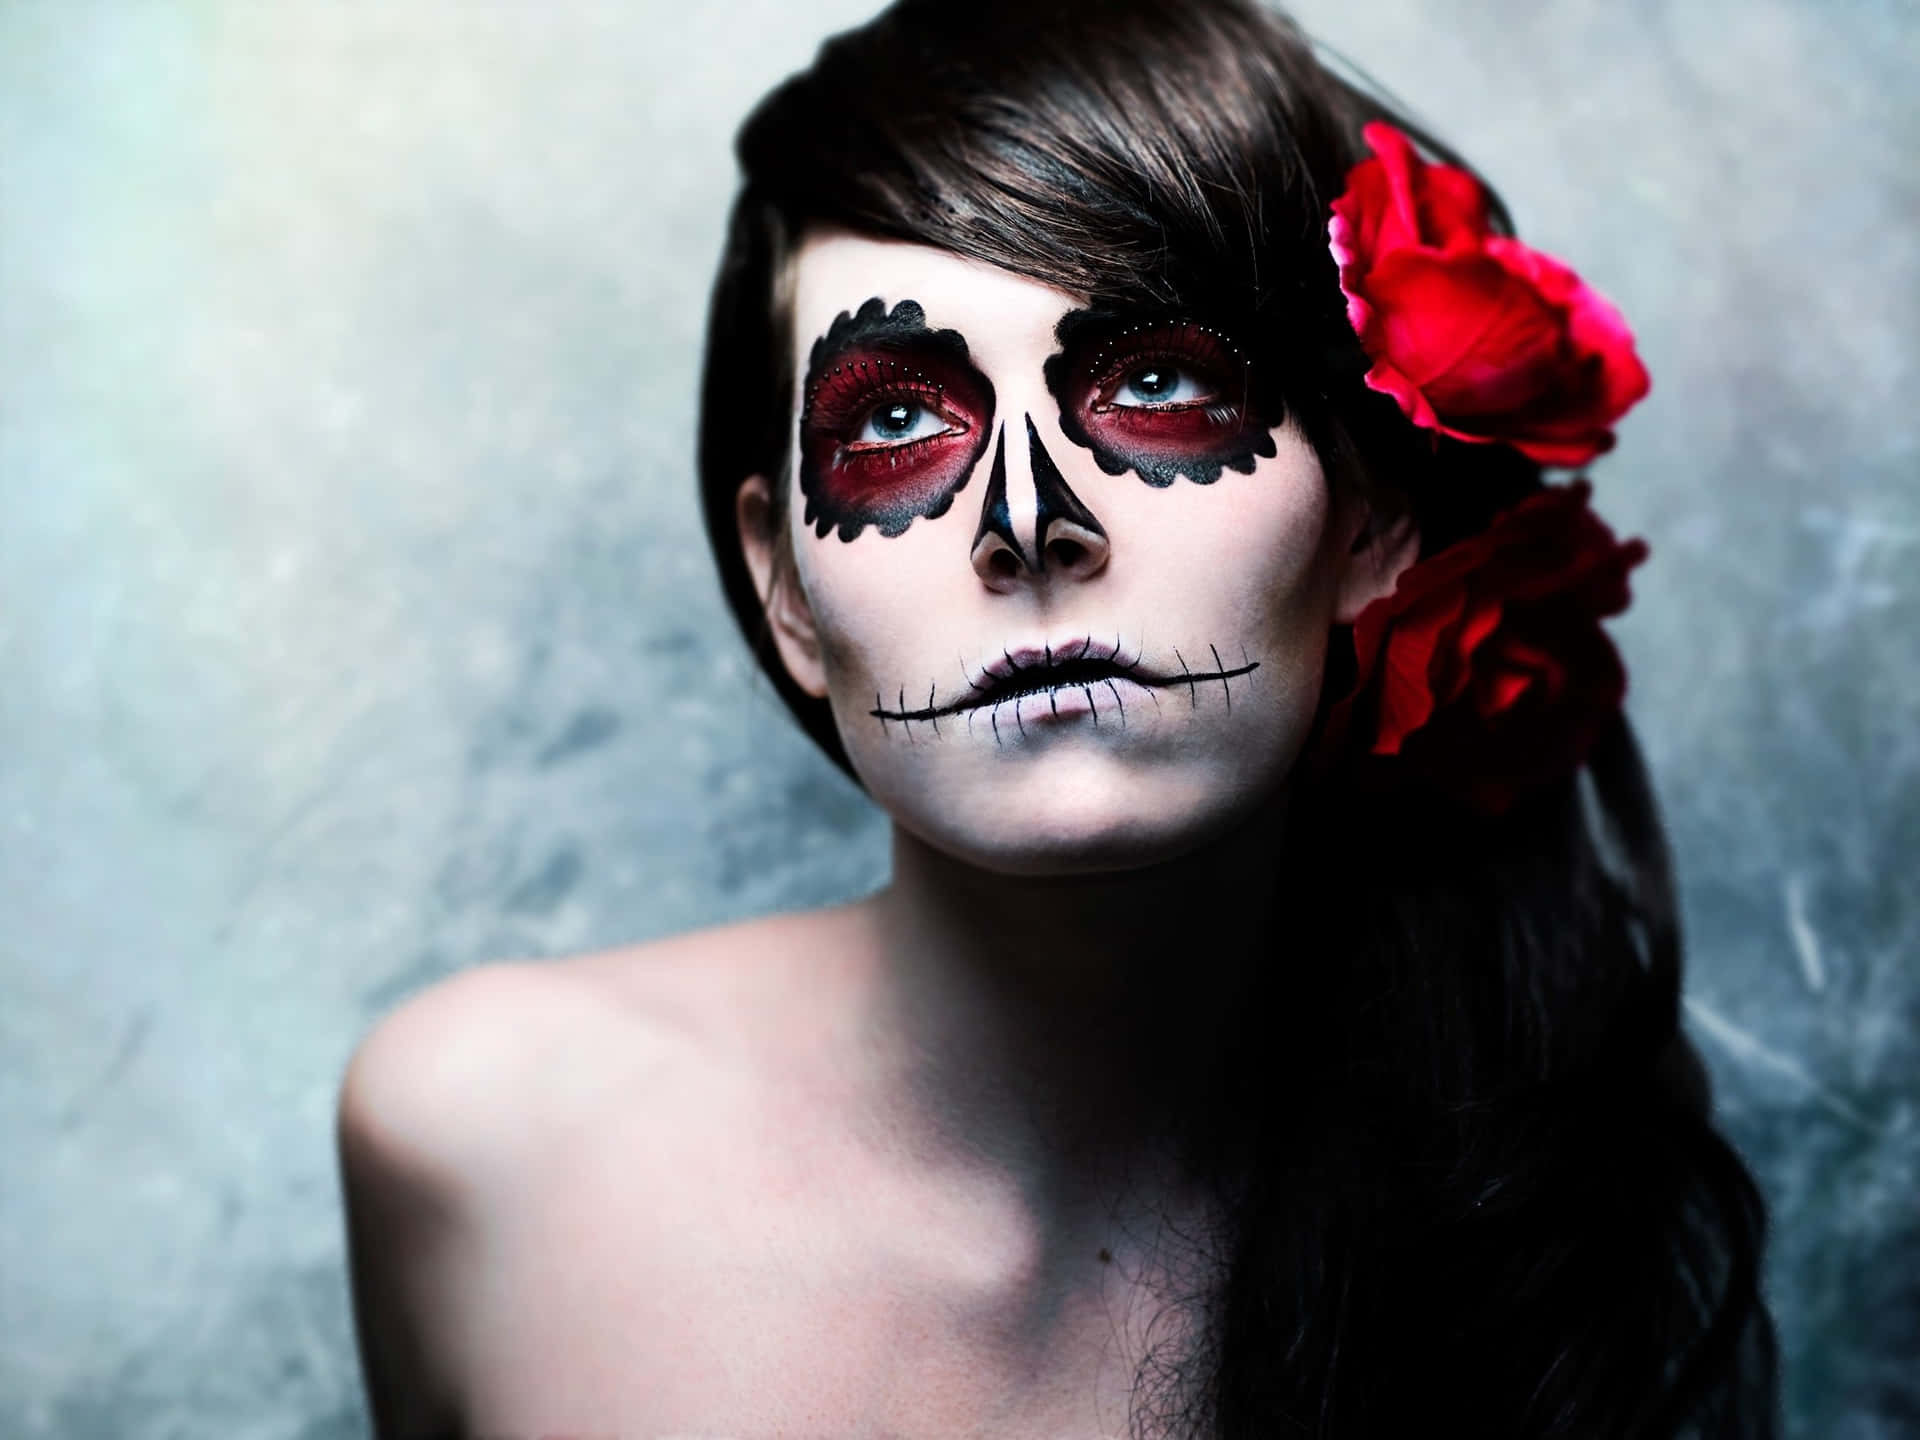 Get your spook on this Halloween with creative makeup!" Wallpaper